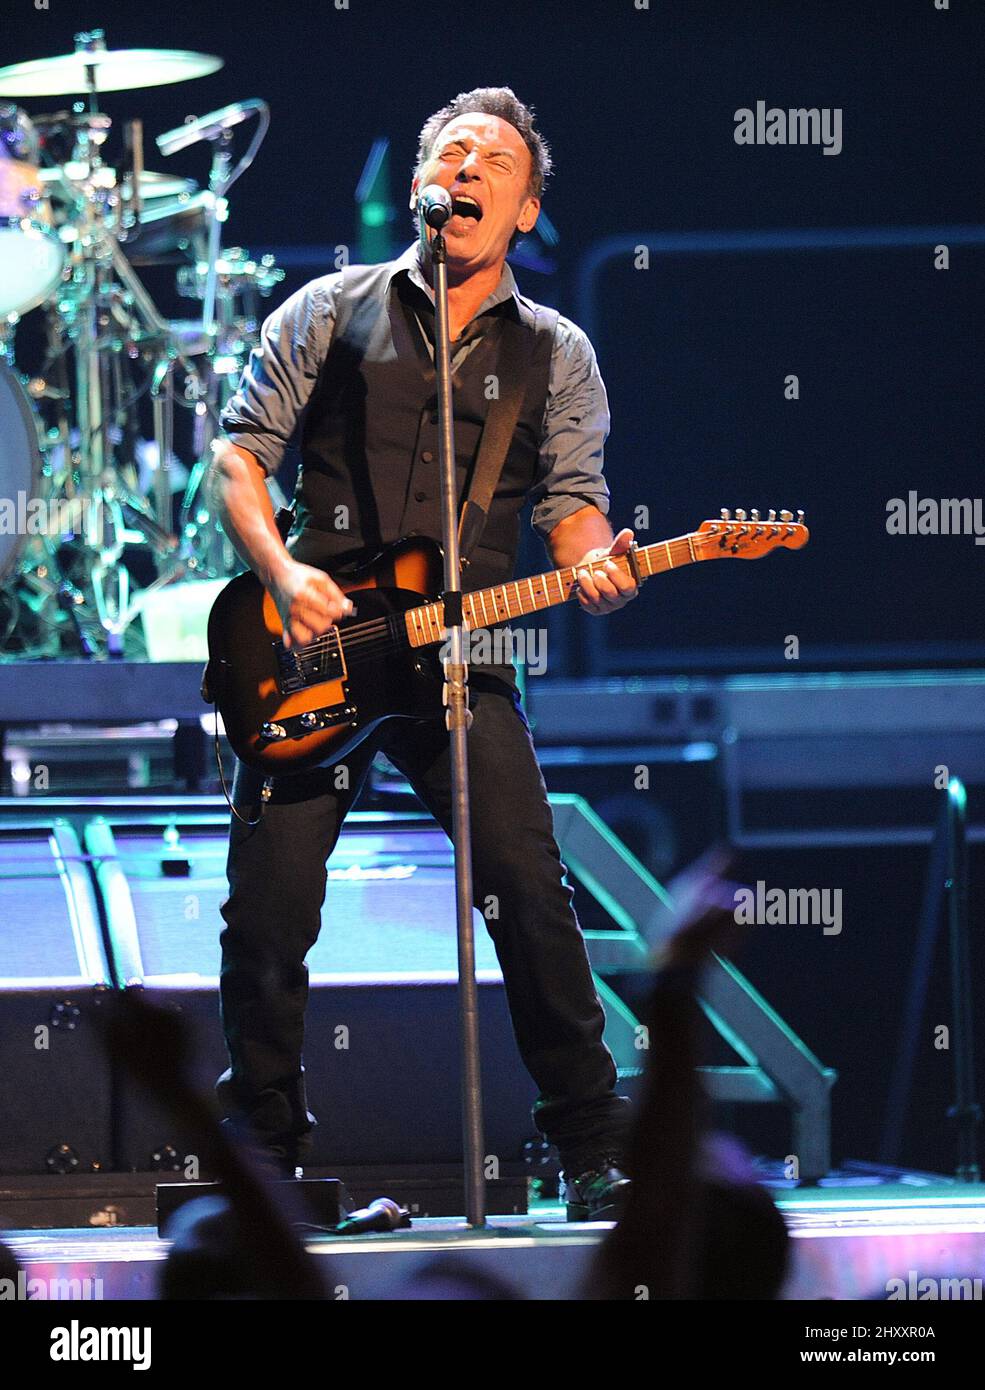 Bruce Springsteen during the 2012 Wrecking Ball tour at the Greensboro Coliseum, North Carolina Stock Photo